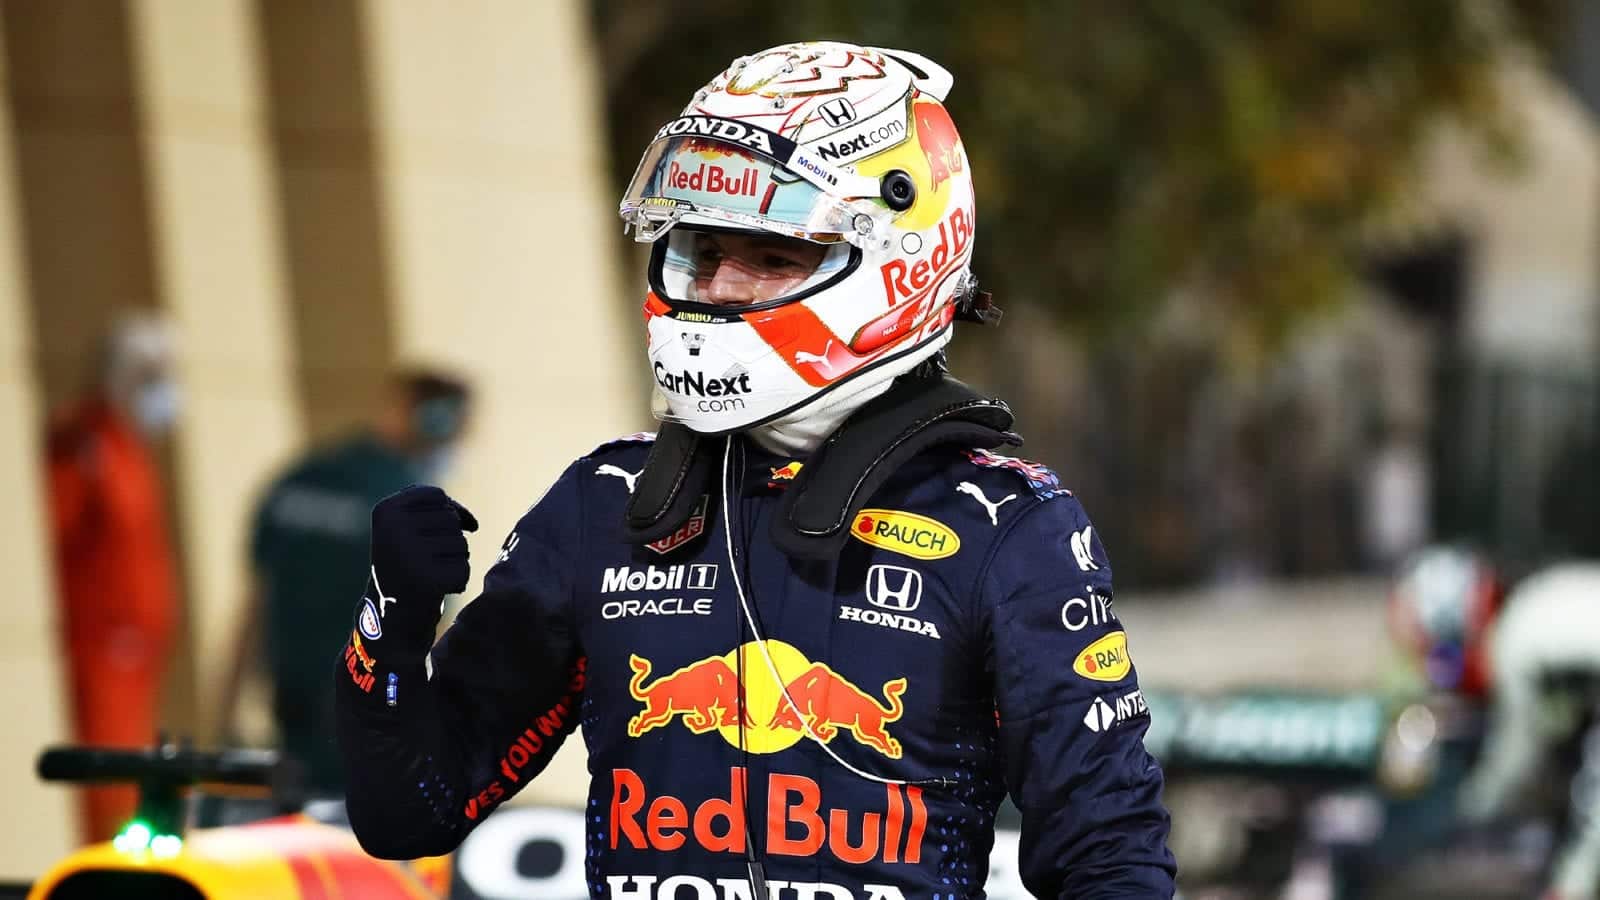 Max Verstappen celebrates clinching pole position for the 2021 Bahrain Grand Prix